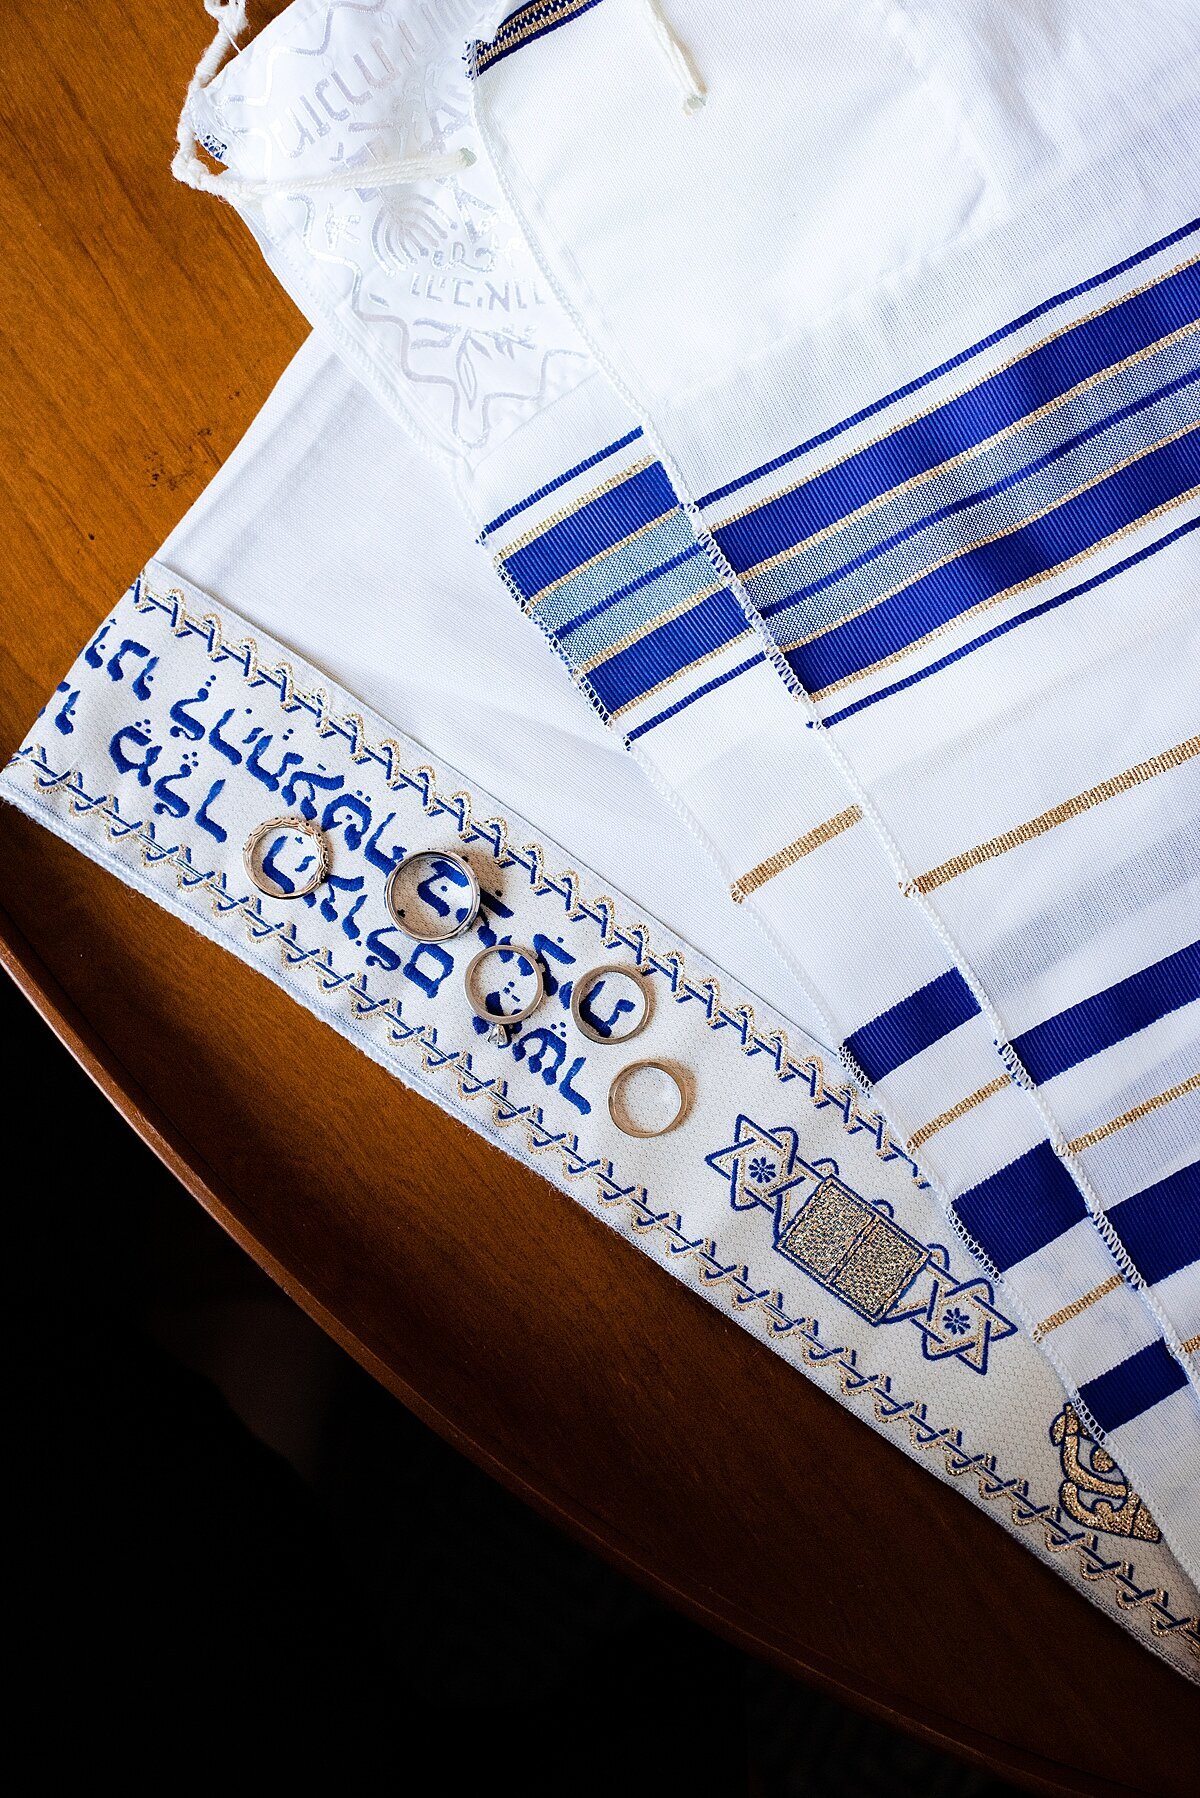 Blue and white tallit with gold wedding and engagement rings